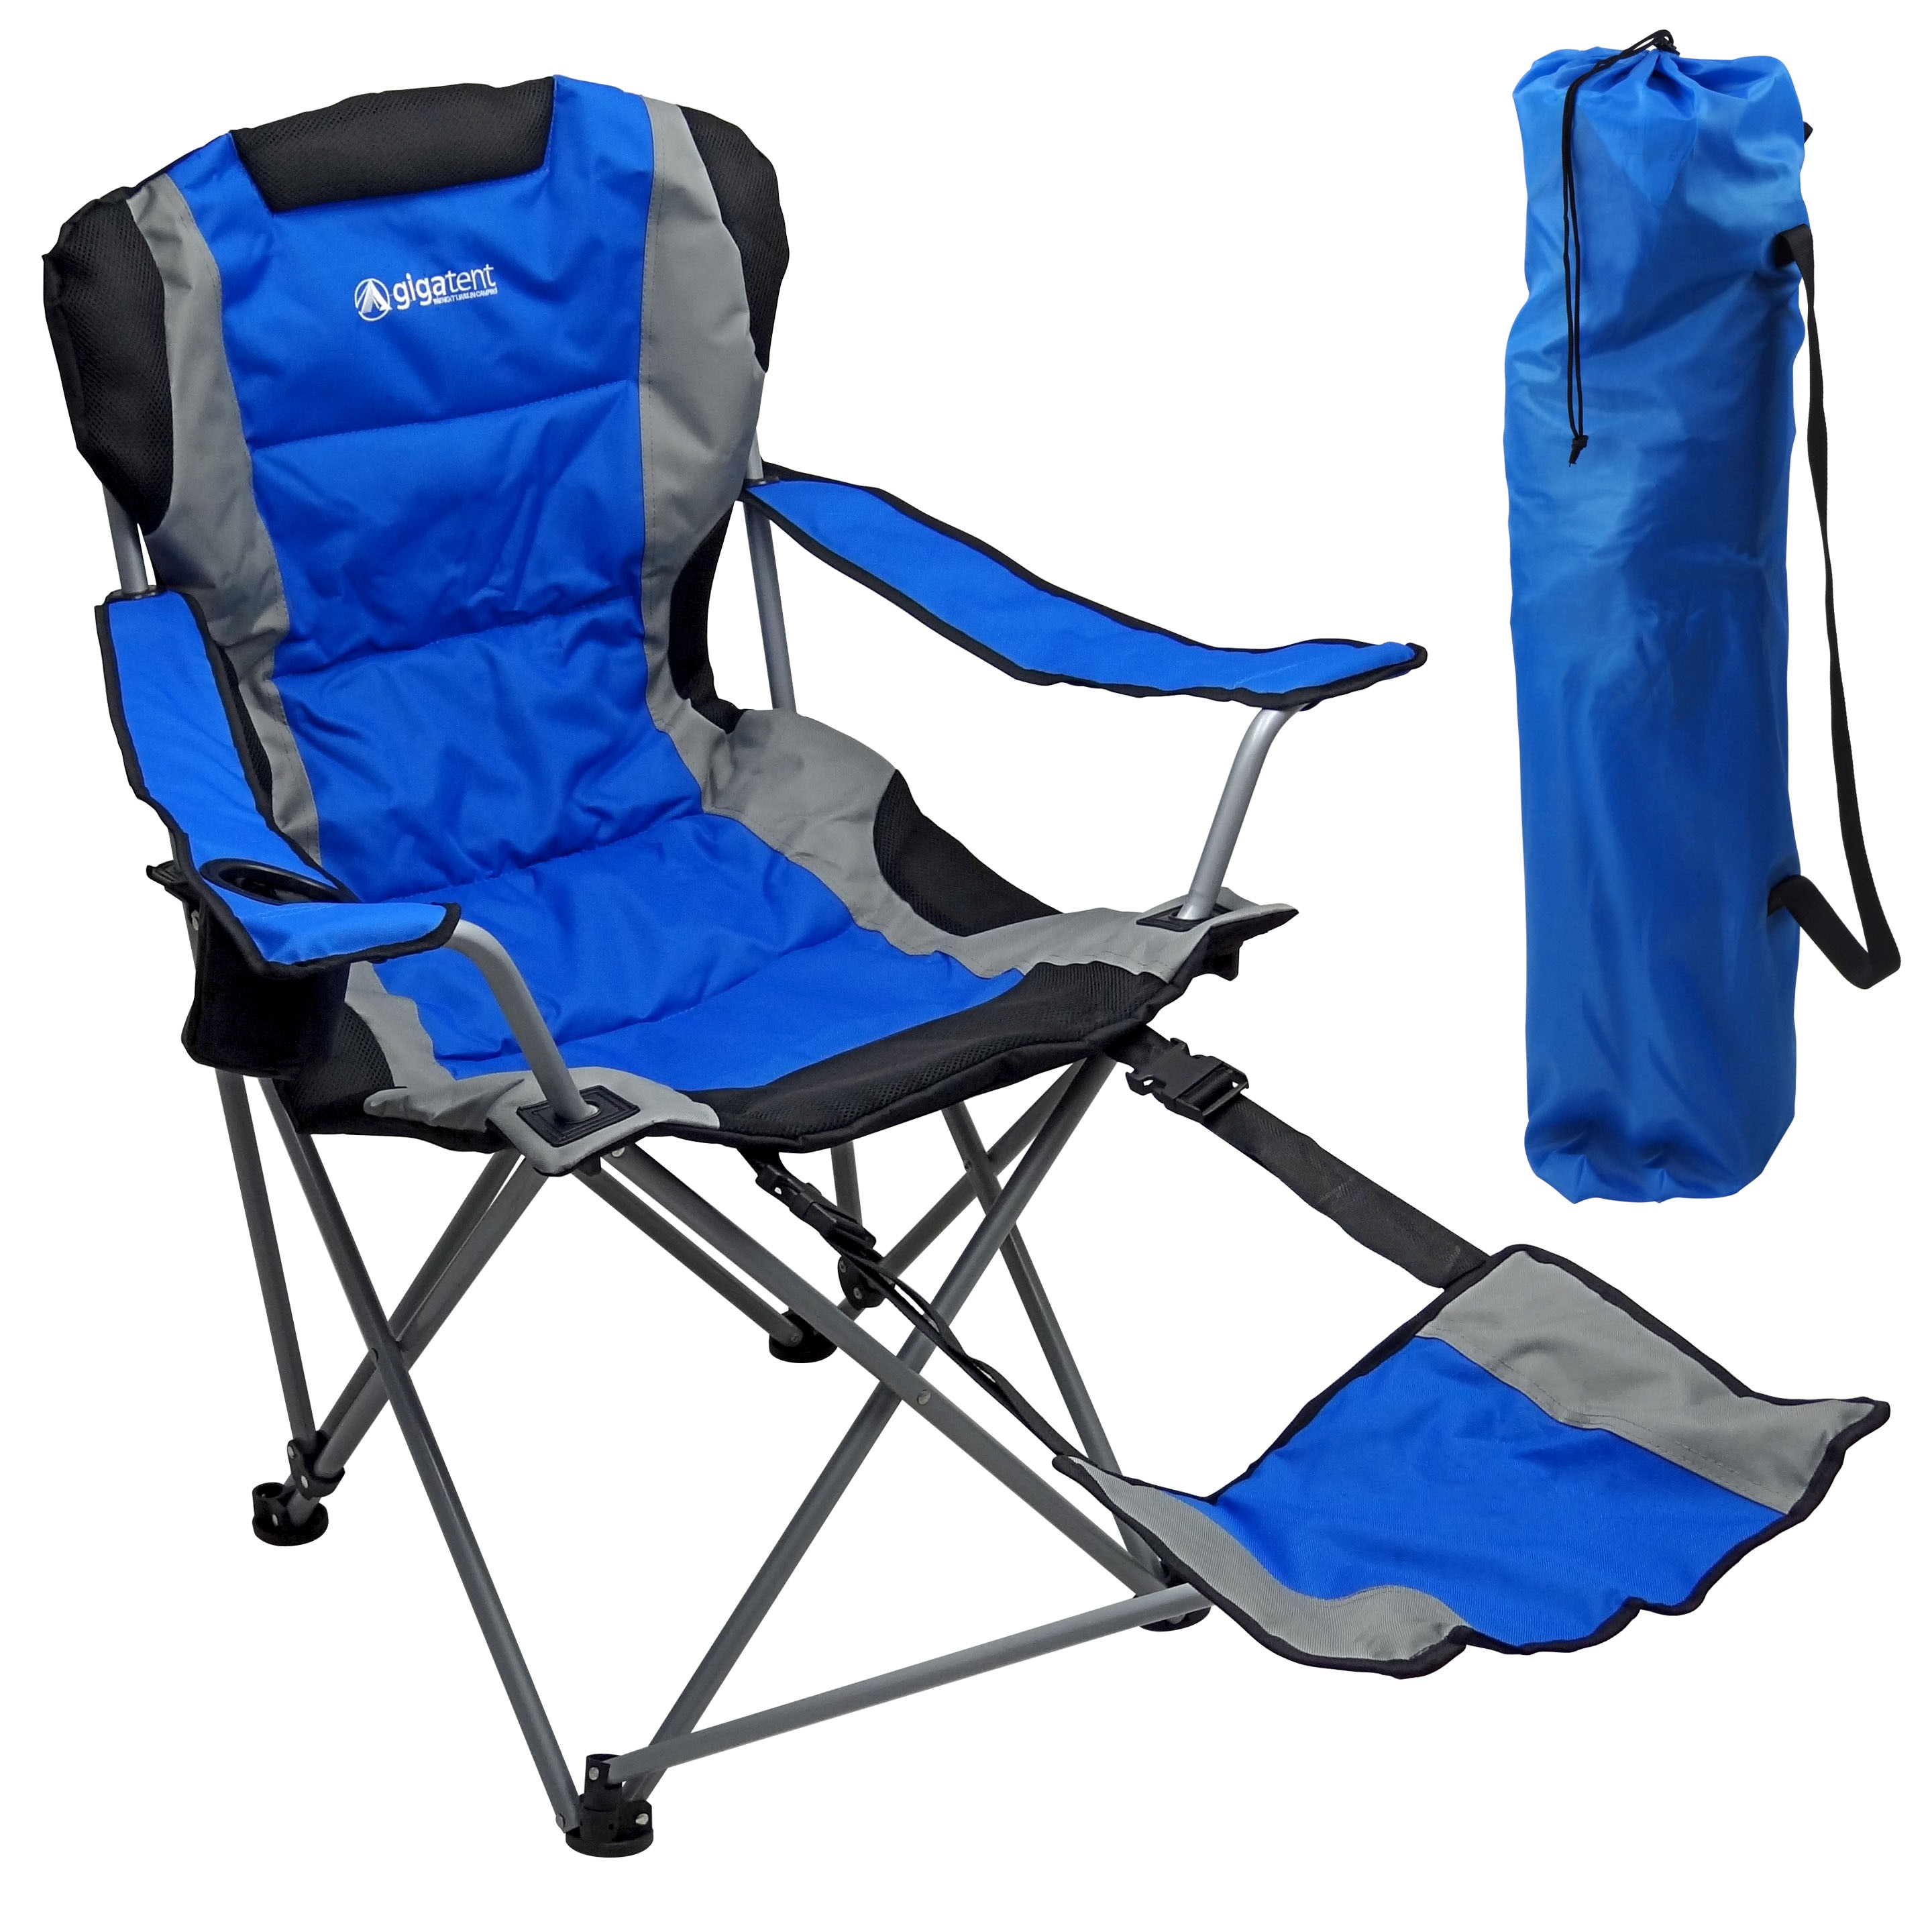 DROZIP Folding Chair Fishing Chair Beach Chair Outdoor Portable Chair Navy  Compact Folding Type, Sills Pluggable para exterior Silla de Camping